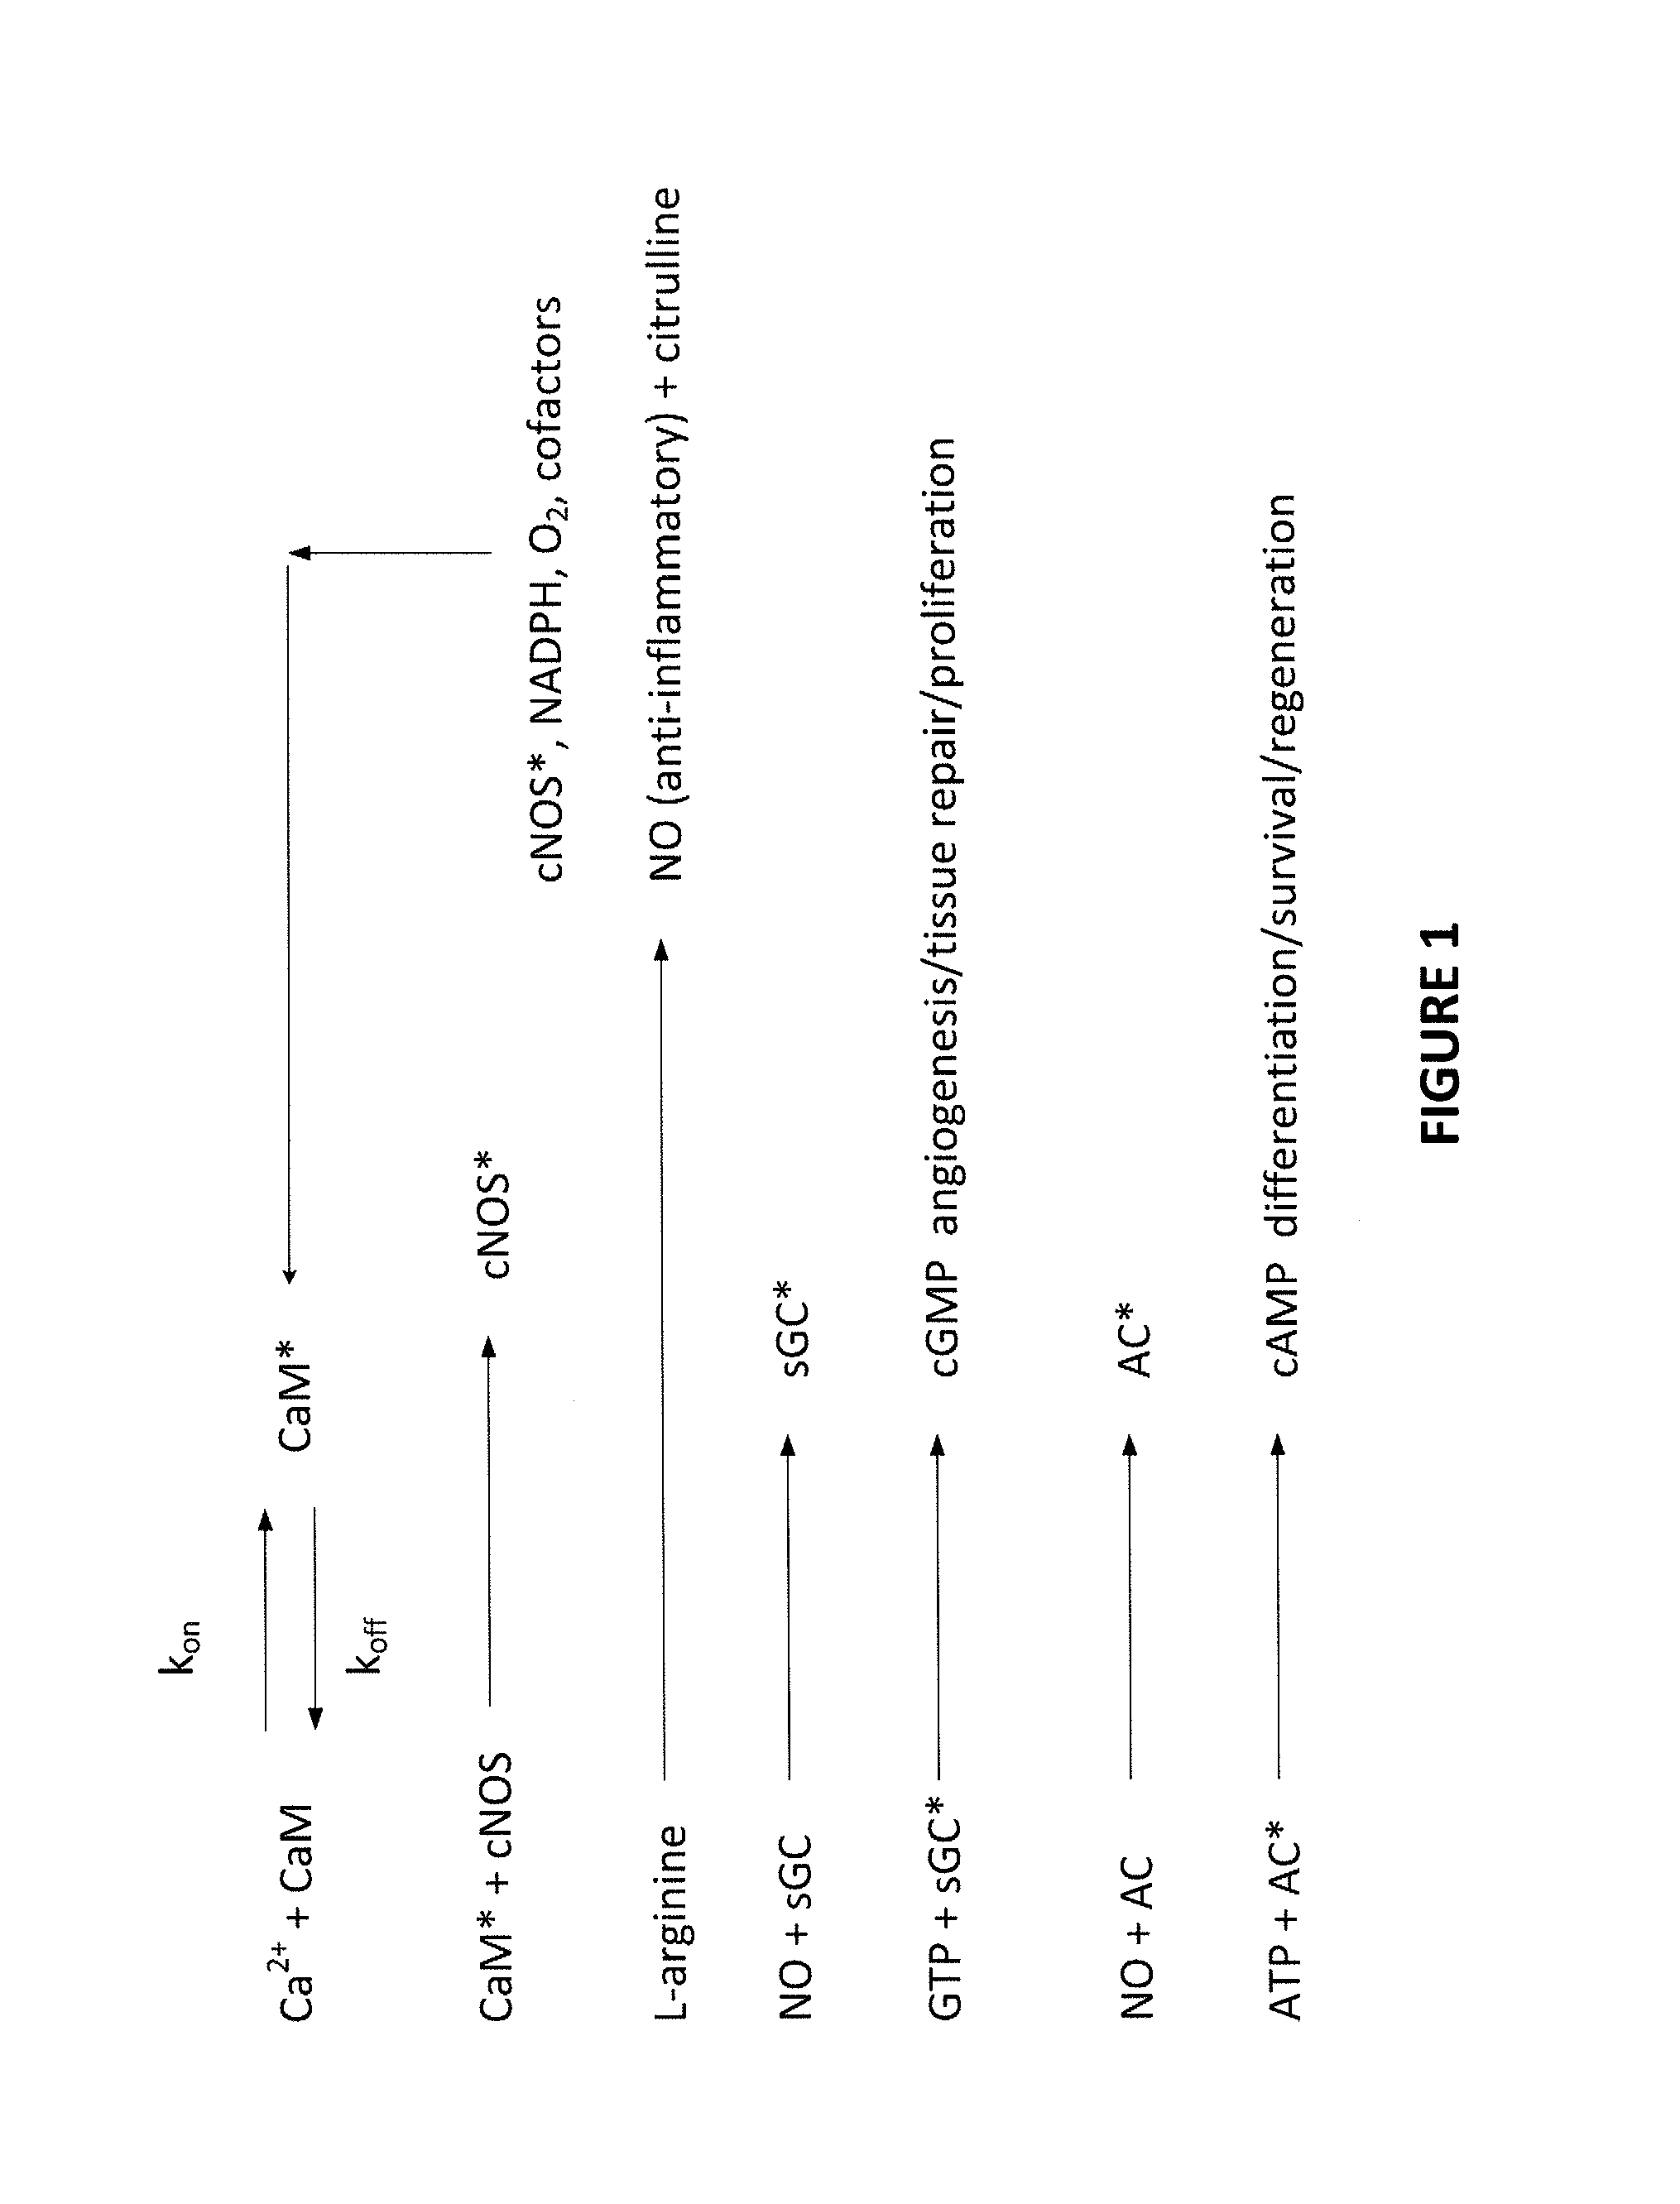 Method and apparatus for electromagnetic enhancement of biochemical signaling pathways for therapeutics and prophylaxis in plants, animals and humans